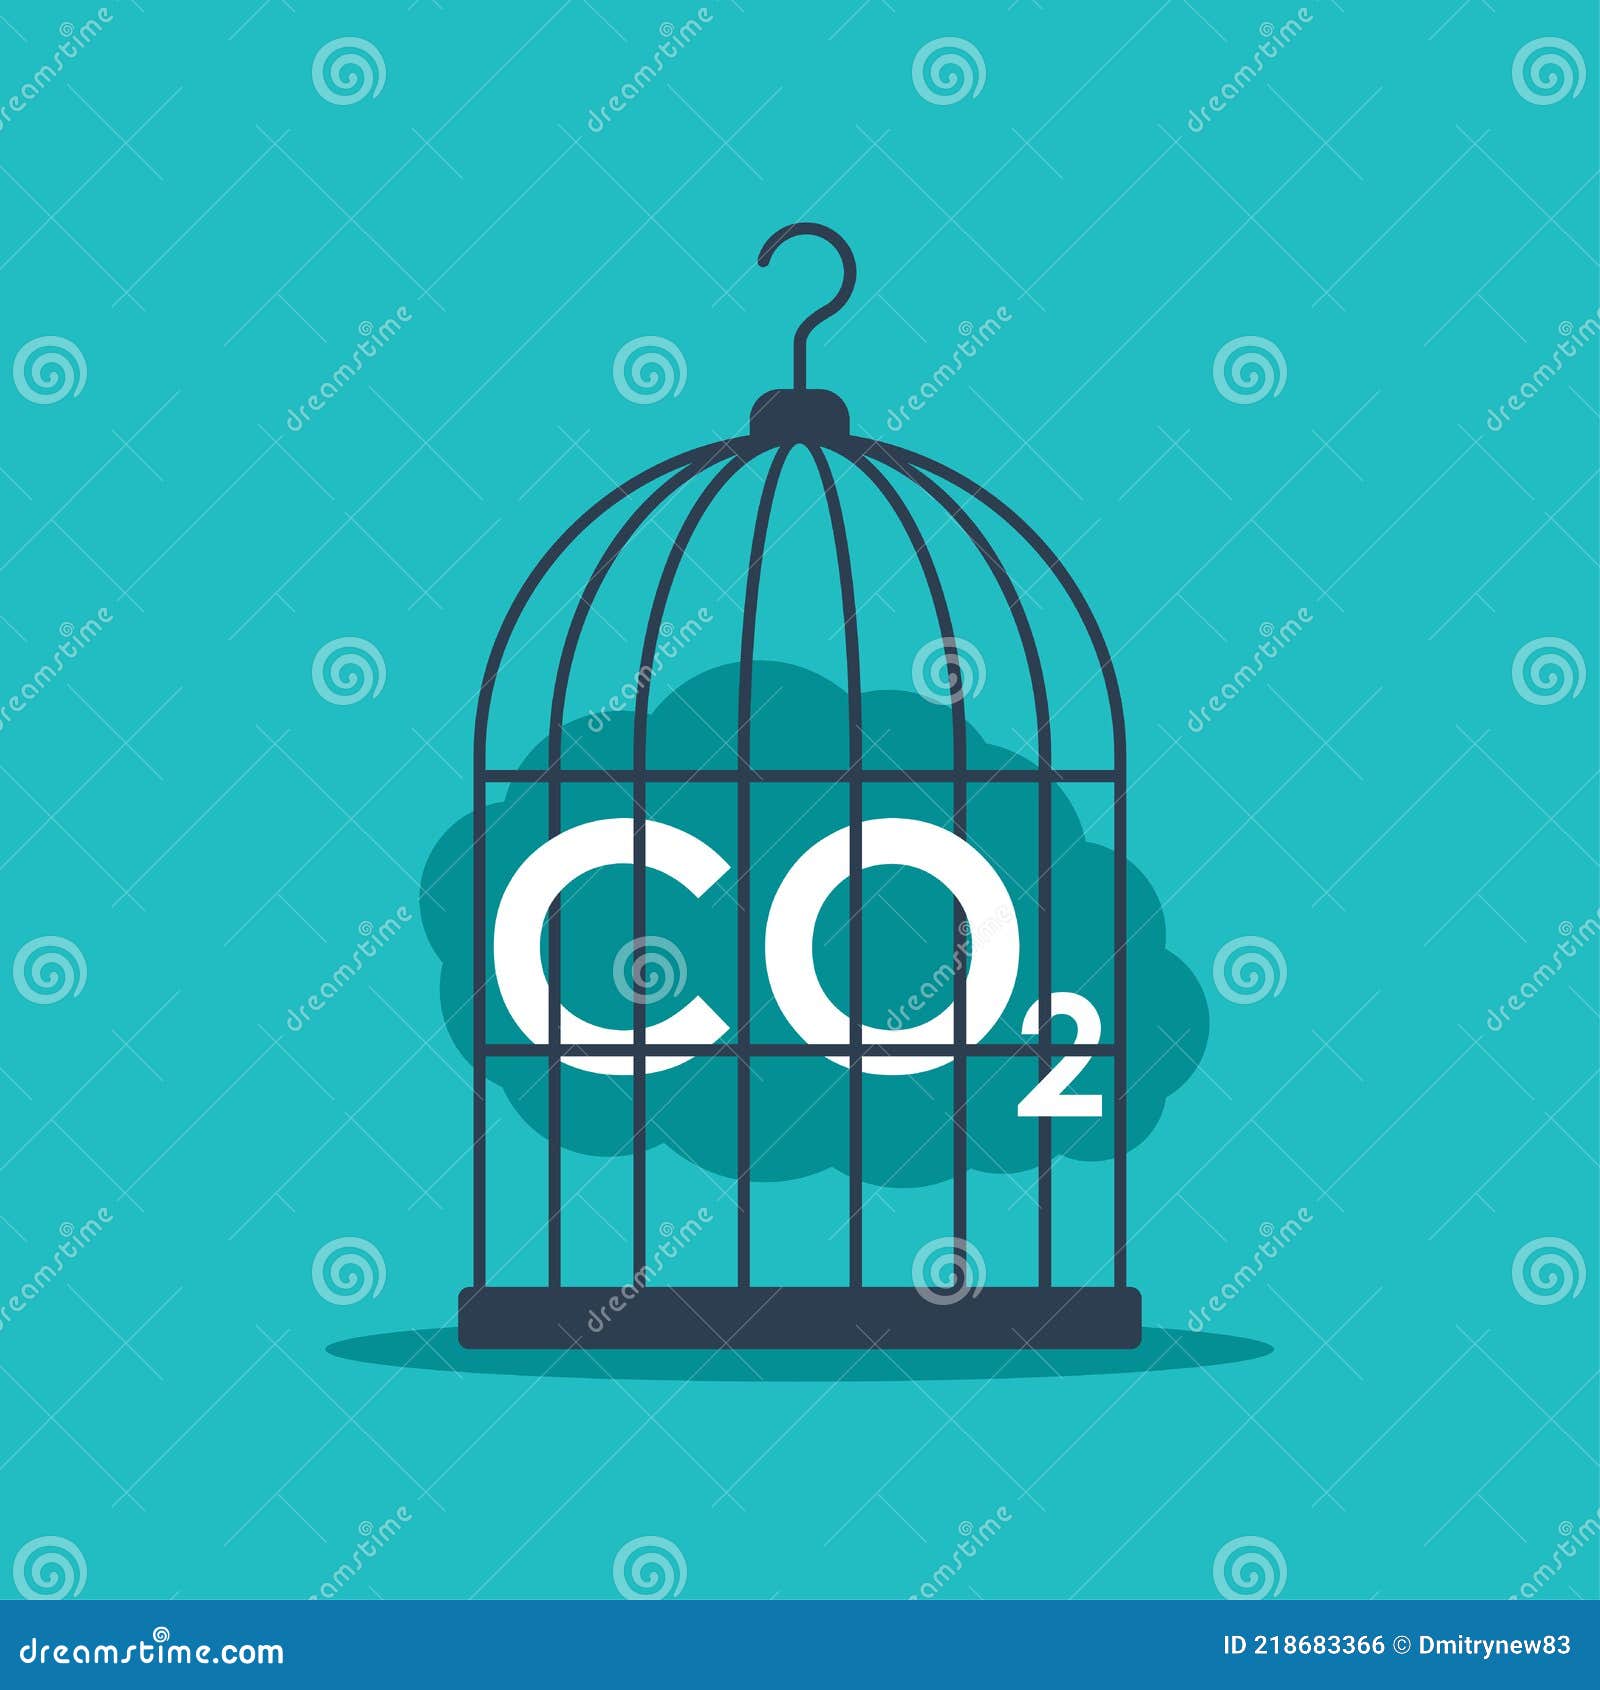 carbon capture technology - co2 in birdcage